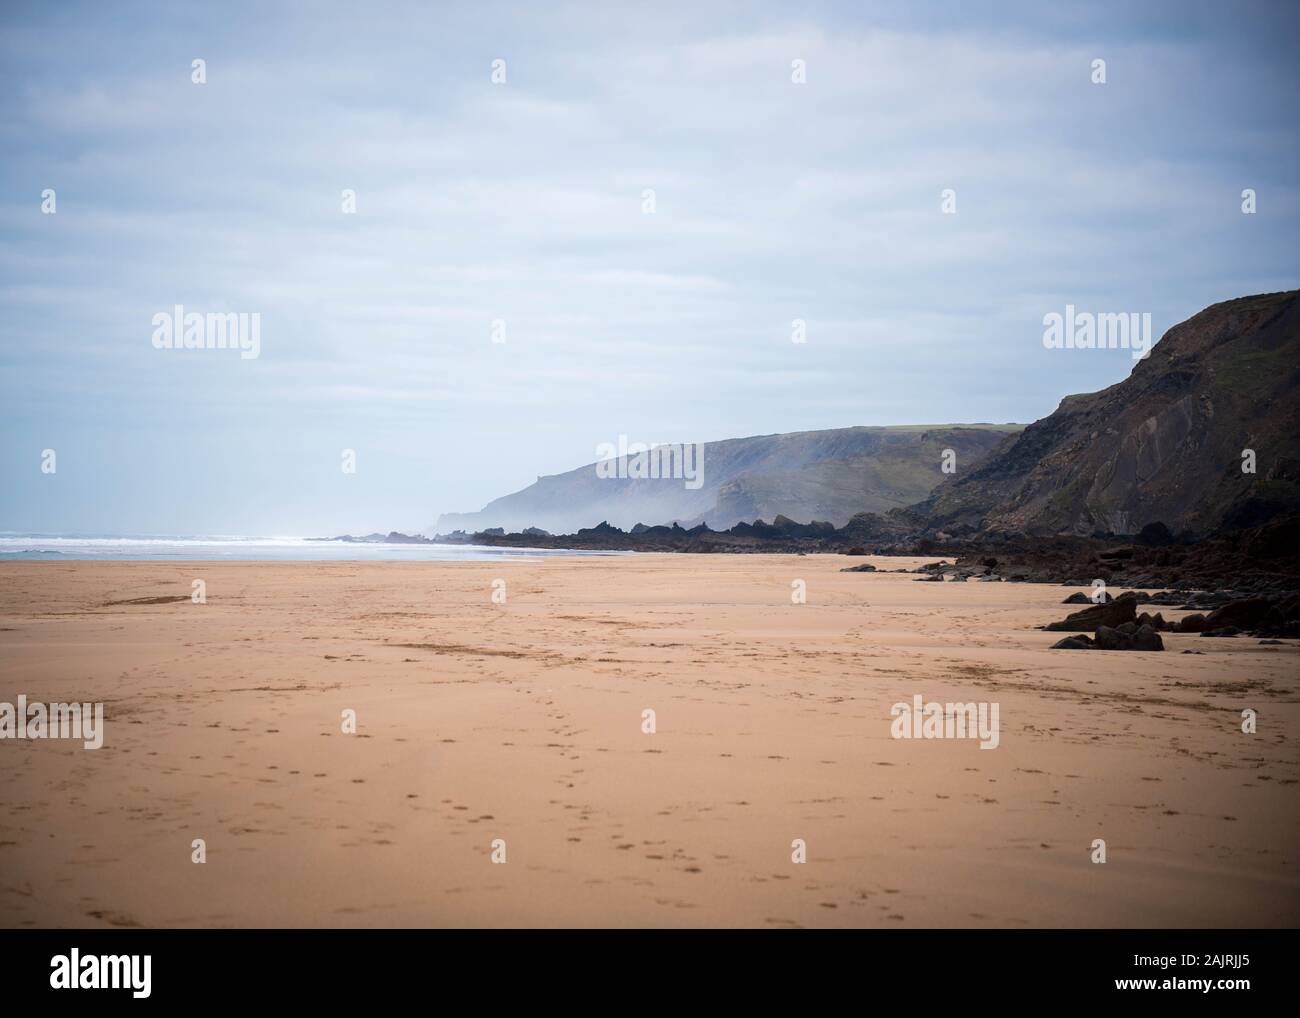 Sandymouth Beach à Bude, Cornwall UK - Janvier 2019 Banque D'Images